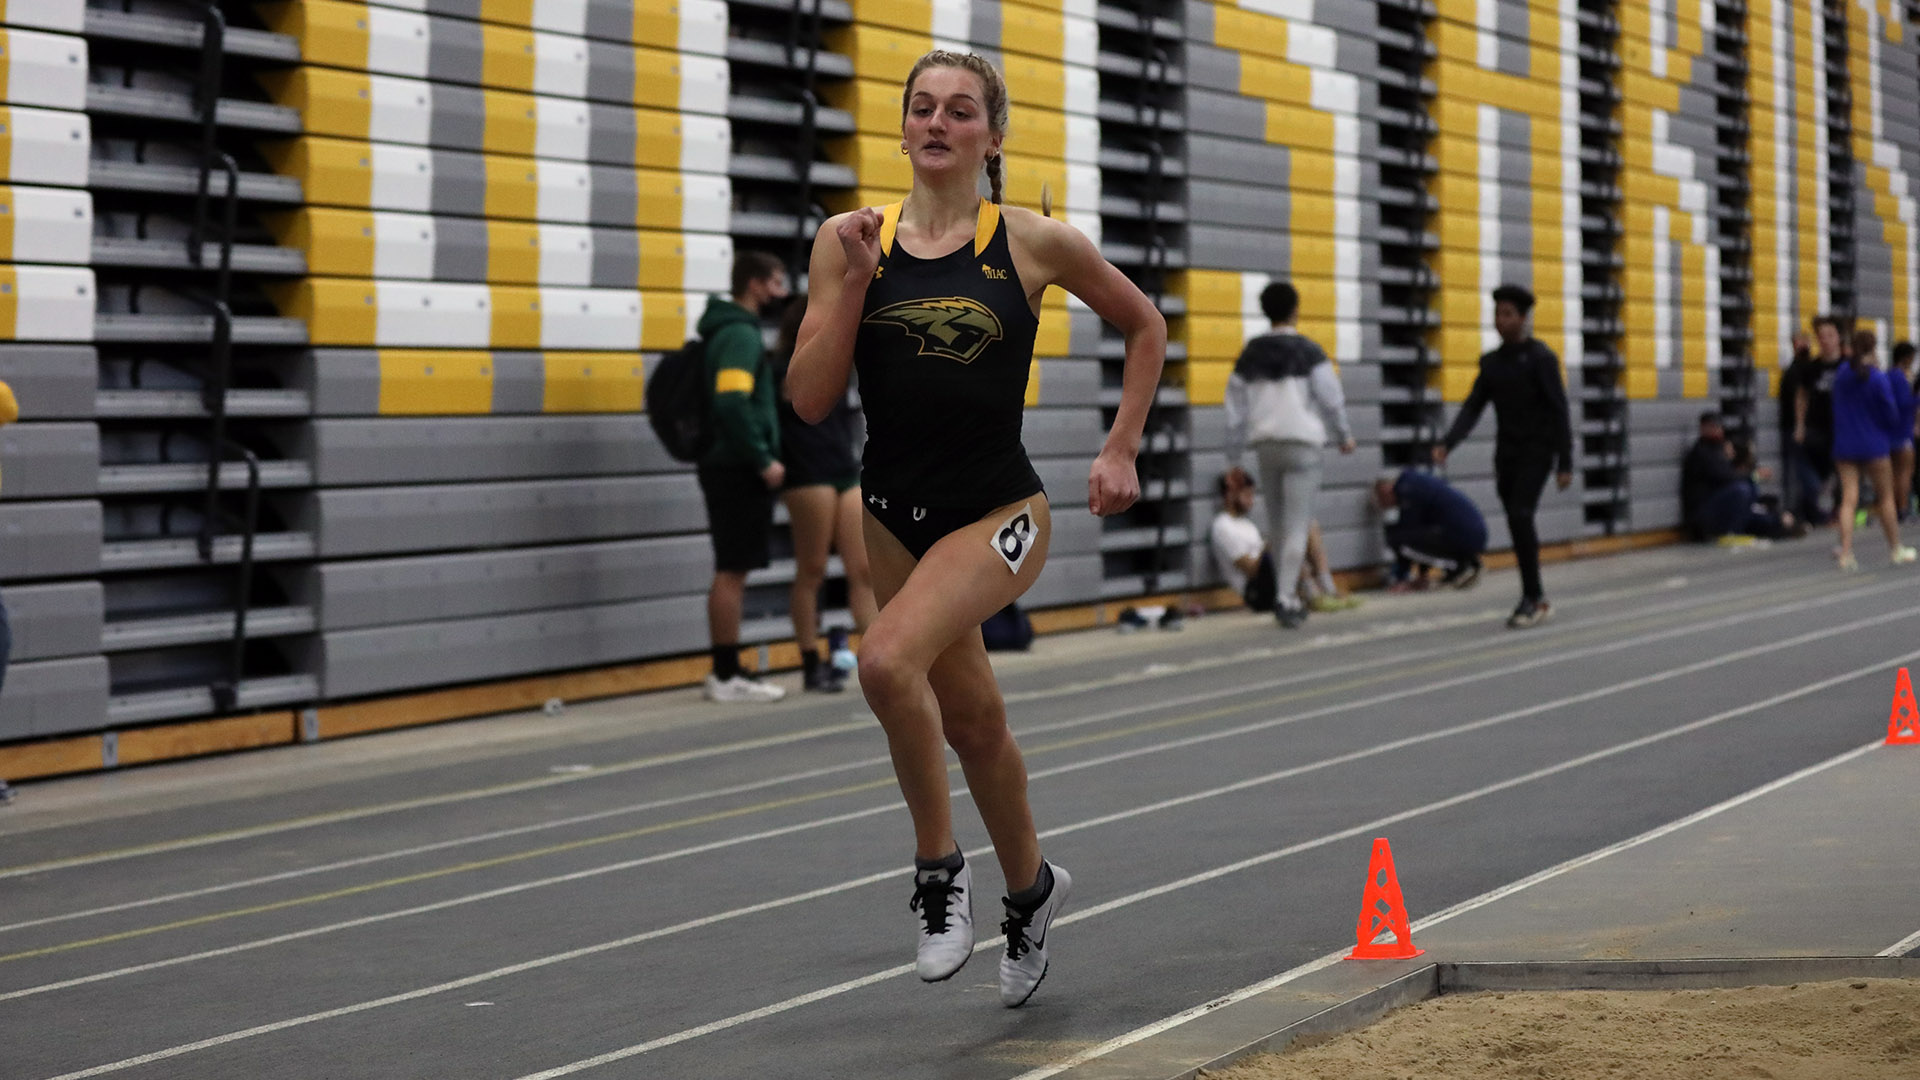 Libby Geisness finished second in the 800-meter run at the Titan Challenge.